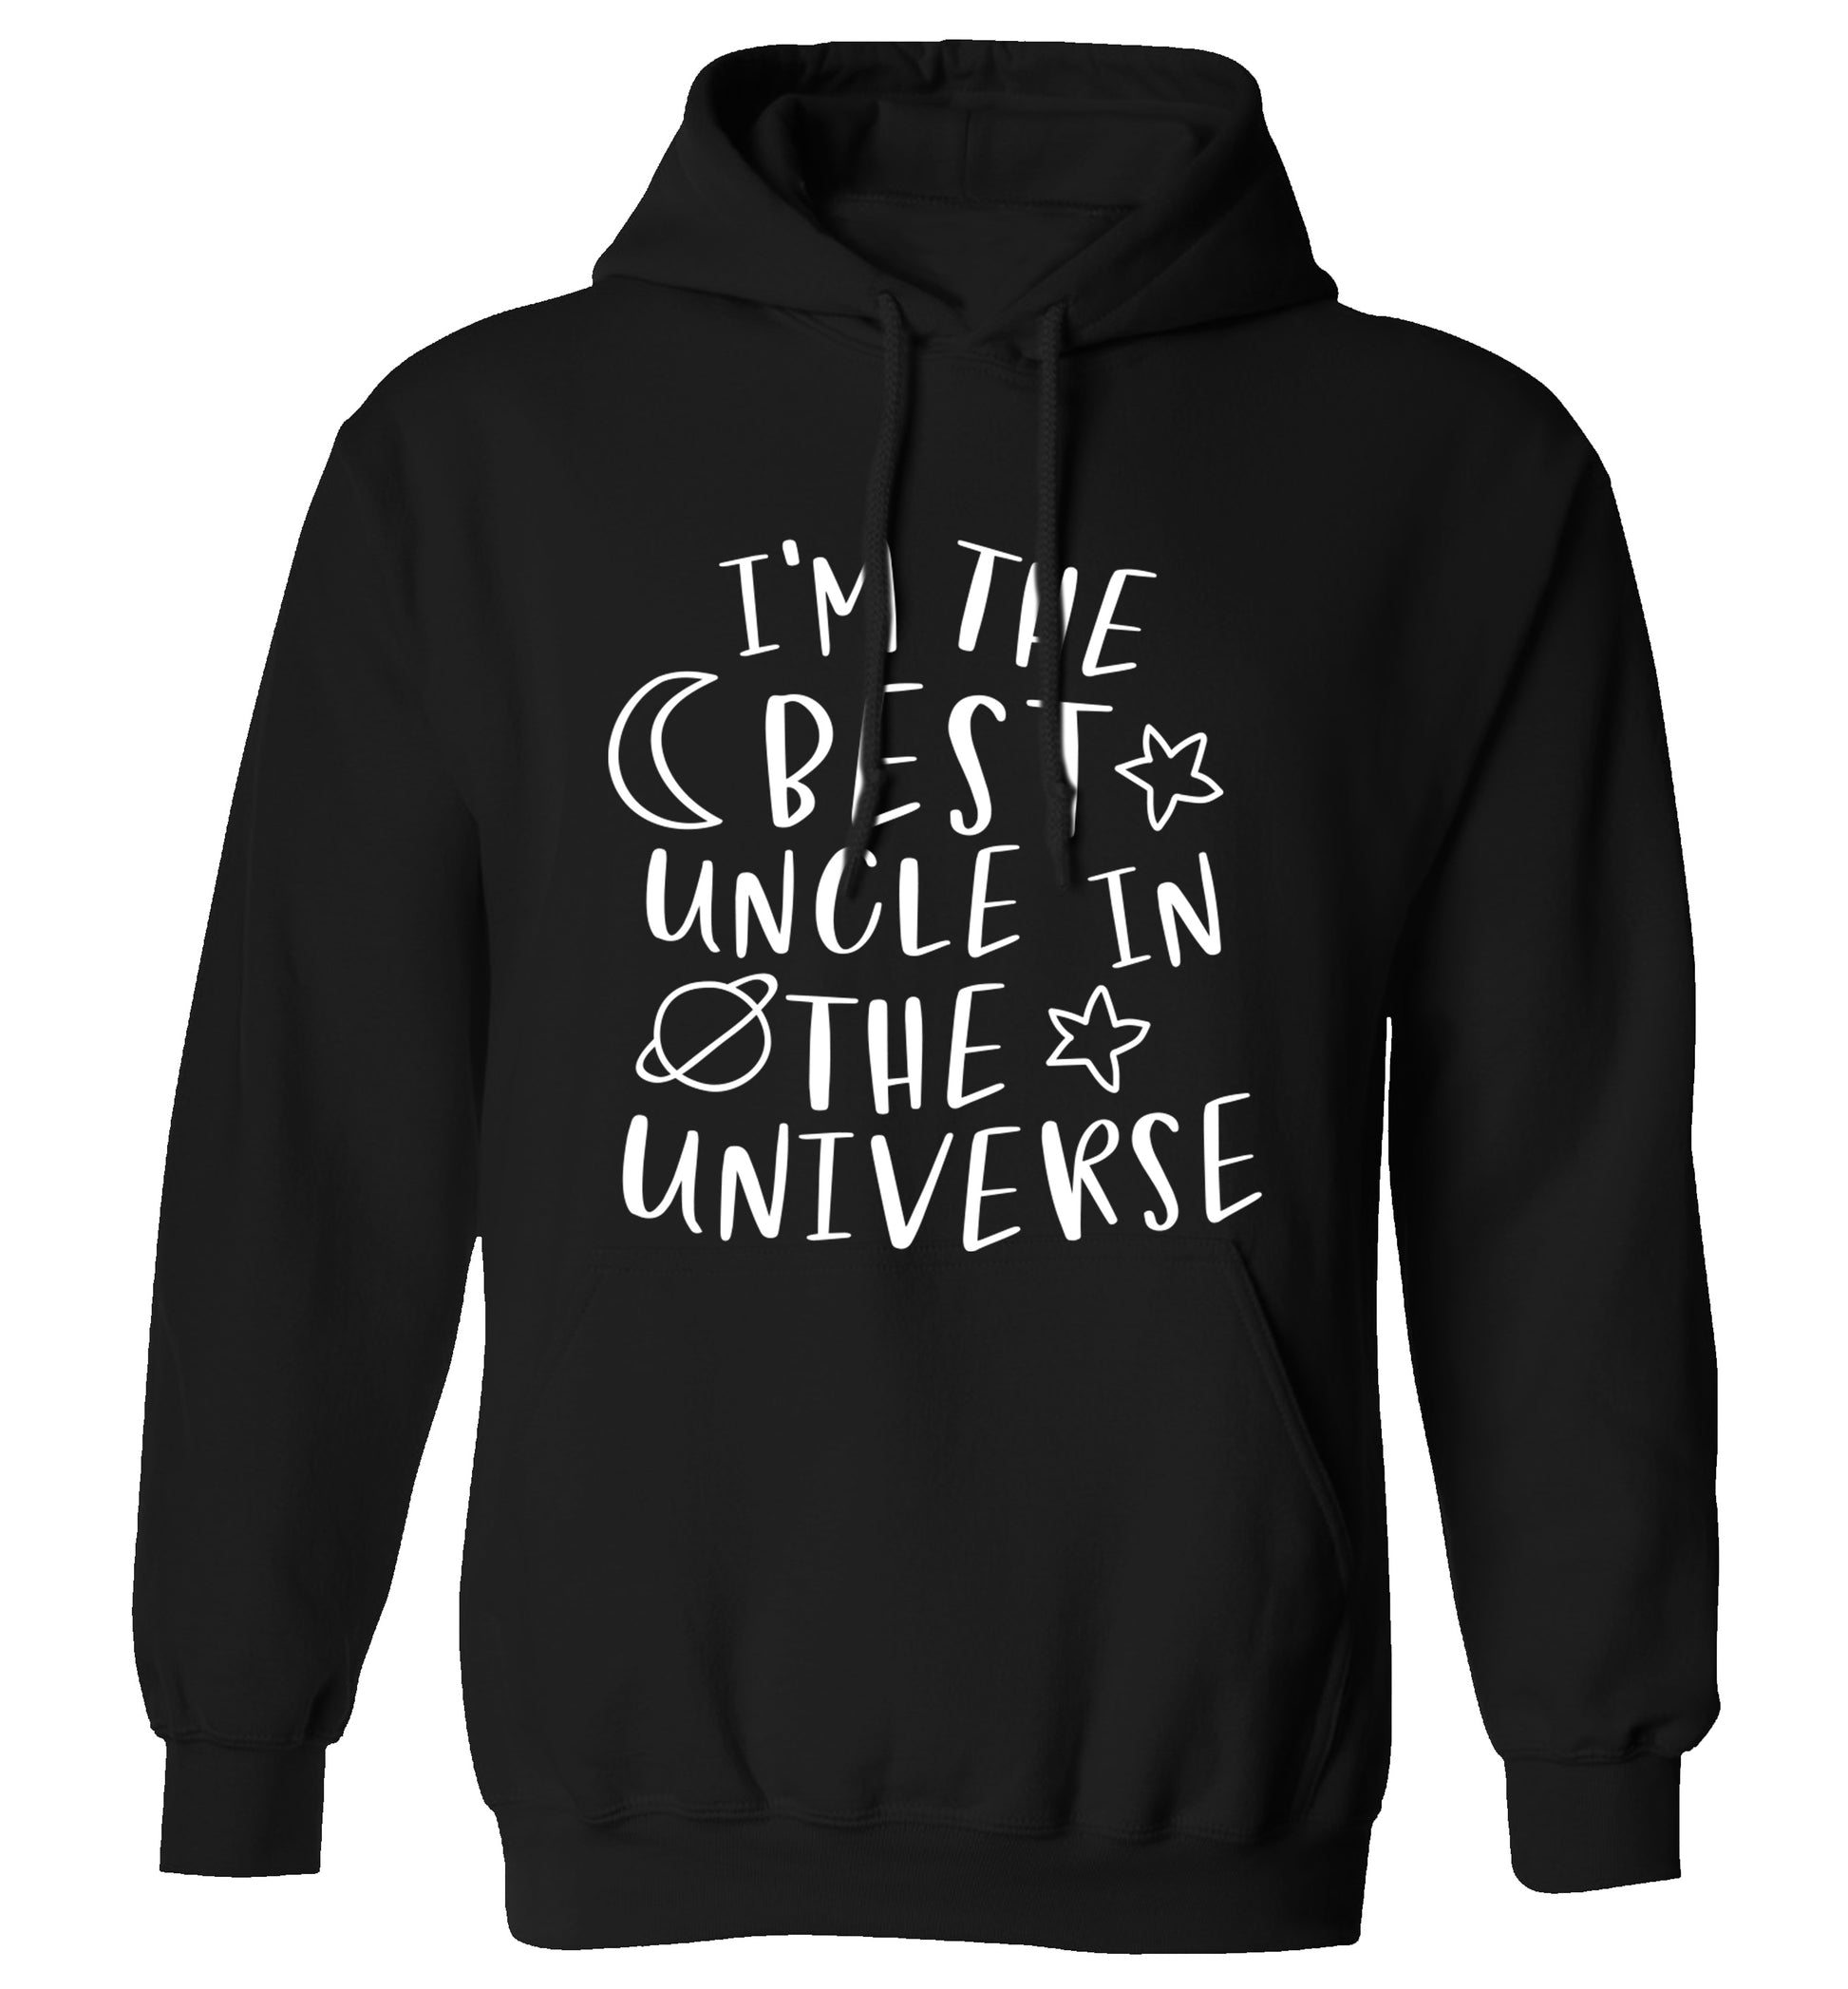 I'm the best uncle in the universe adults unisex black hoodie 2XL